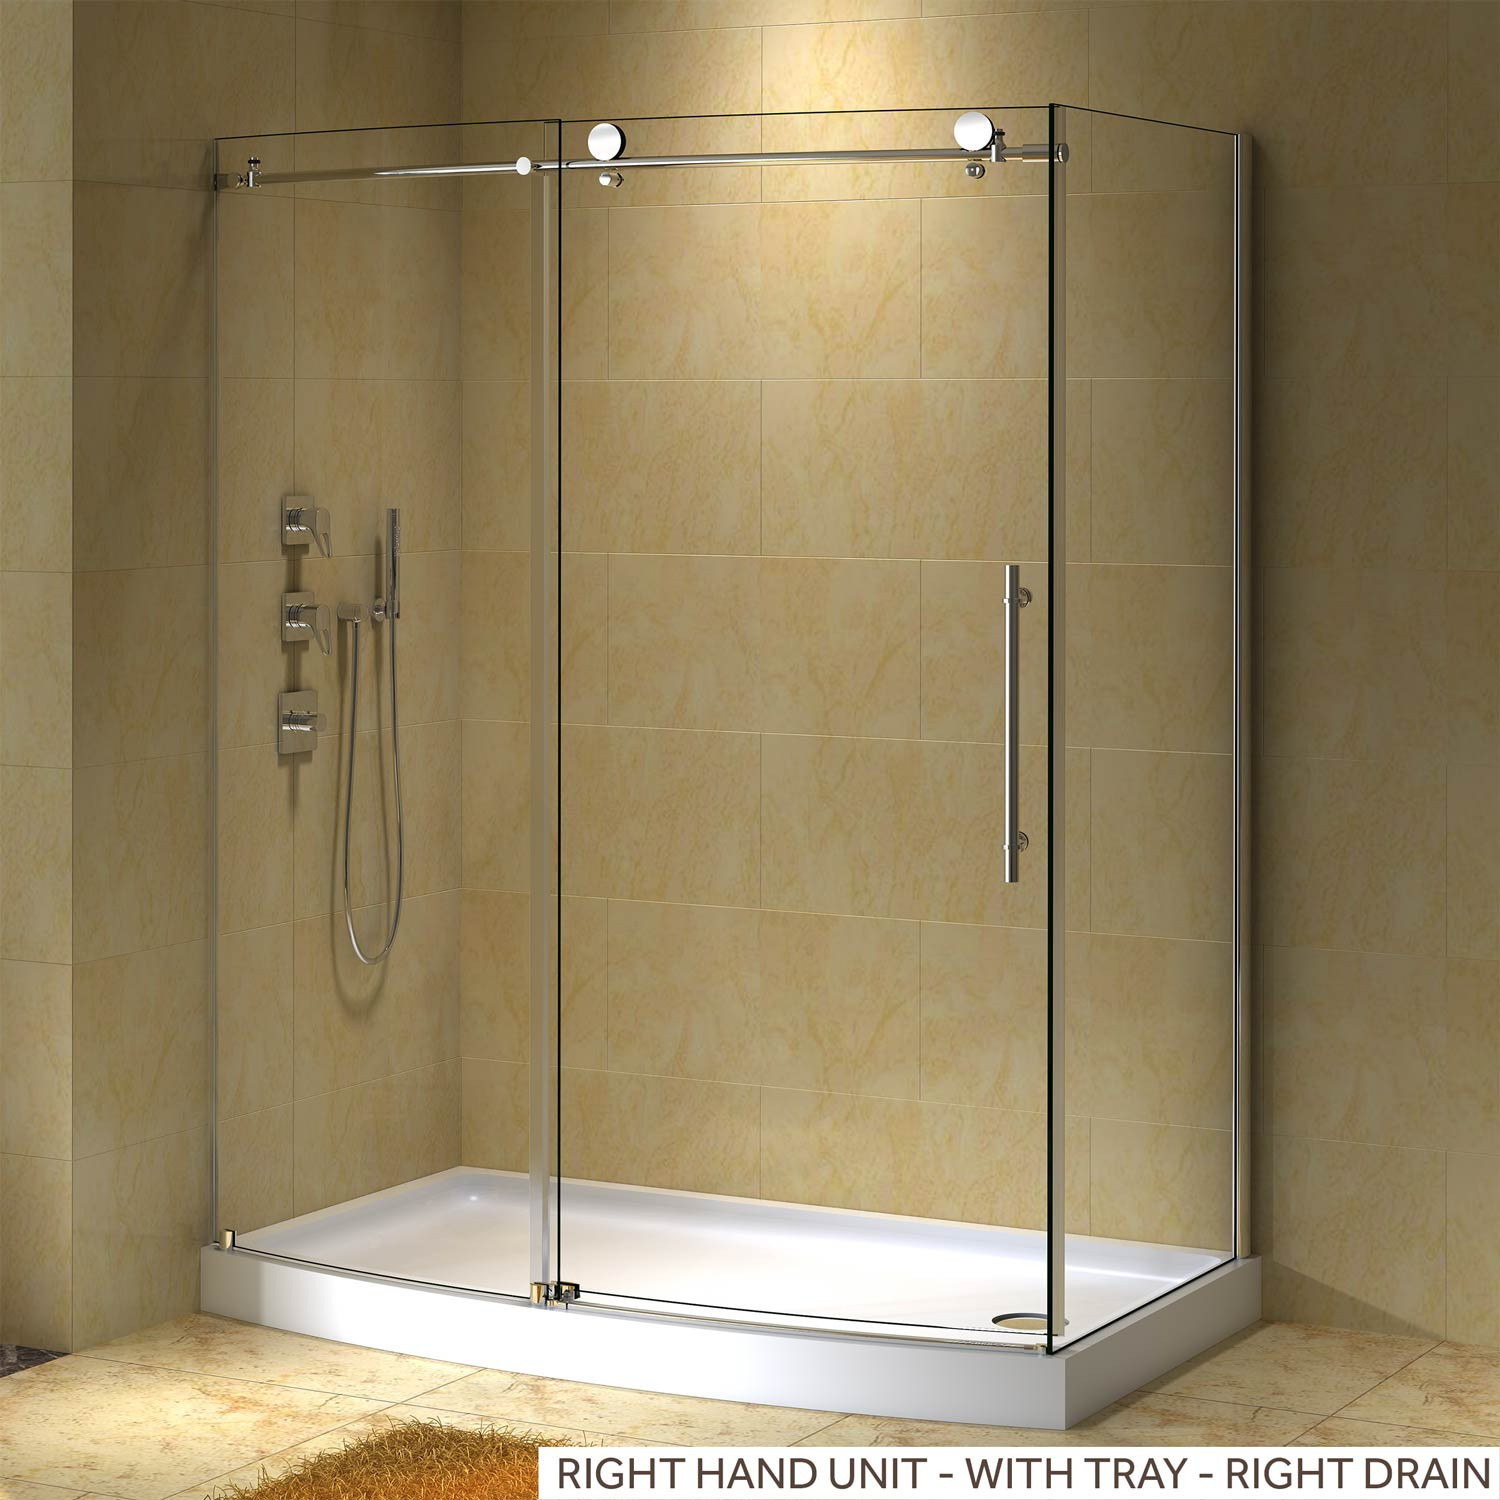 Picture Of Bathroom Showers
 58" x 30" Sloan Corner Shower Enclosure With Arched Front